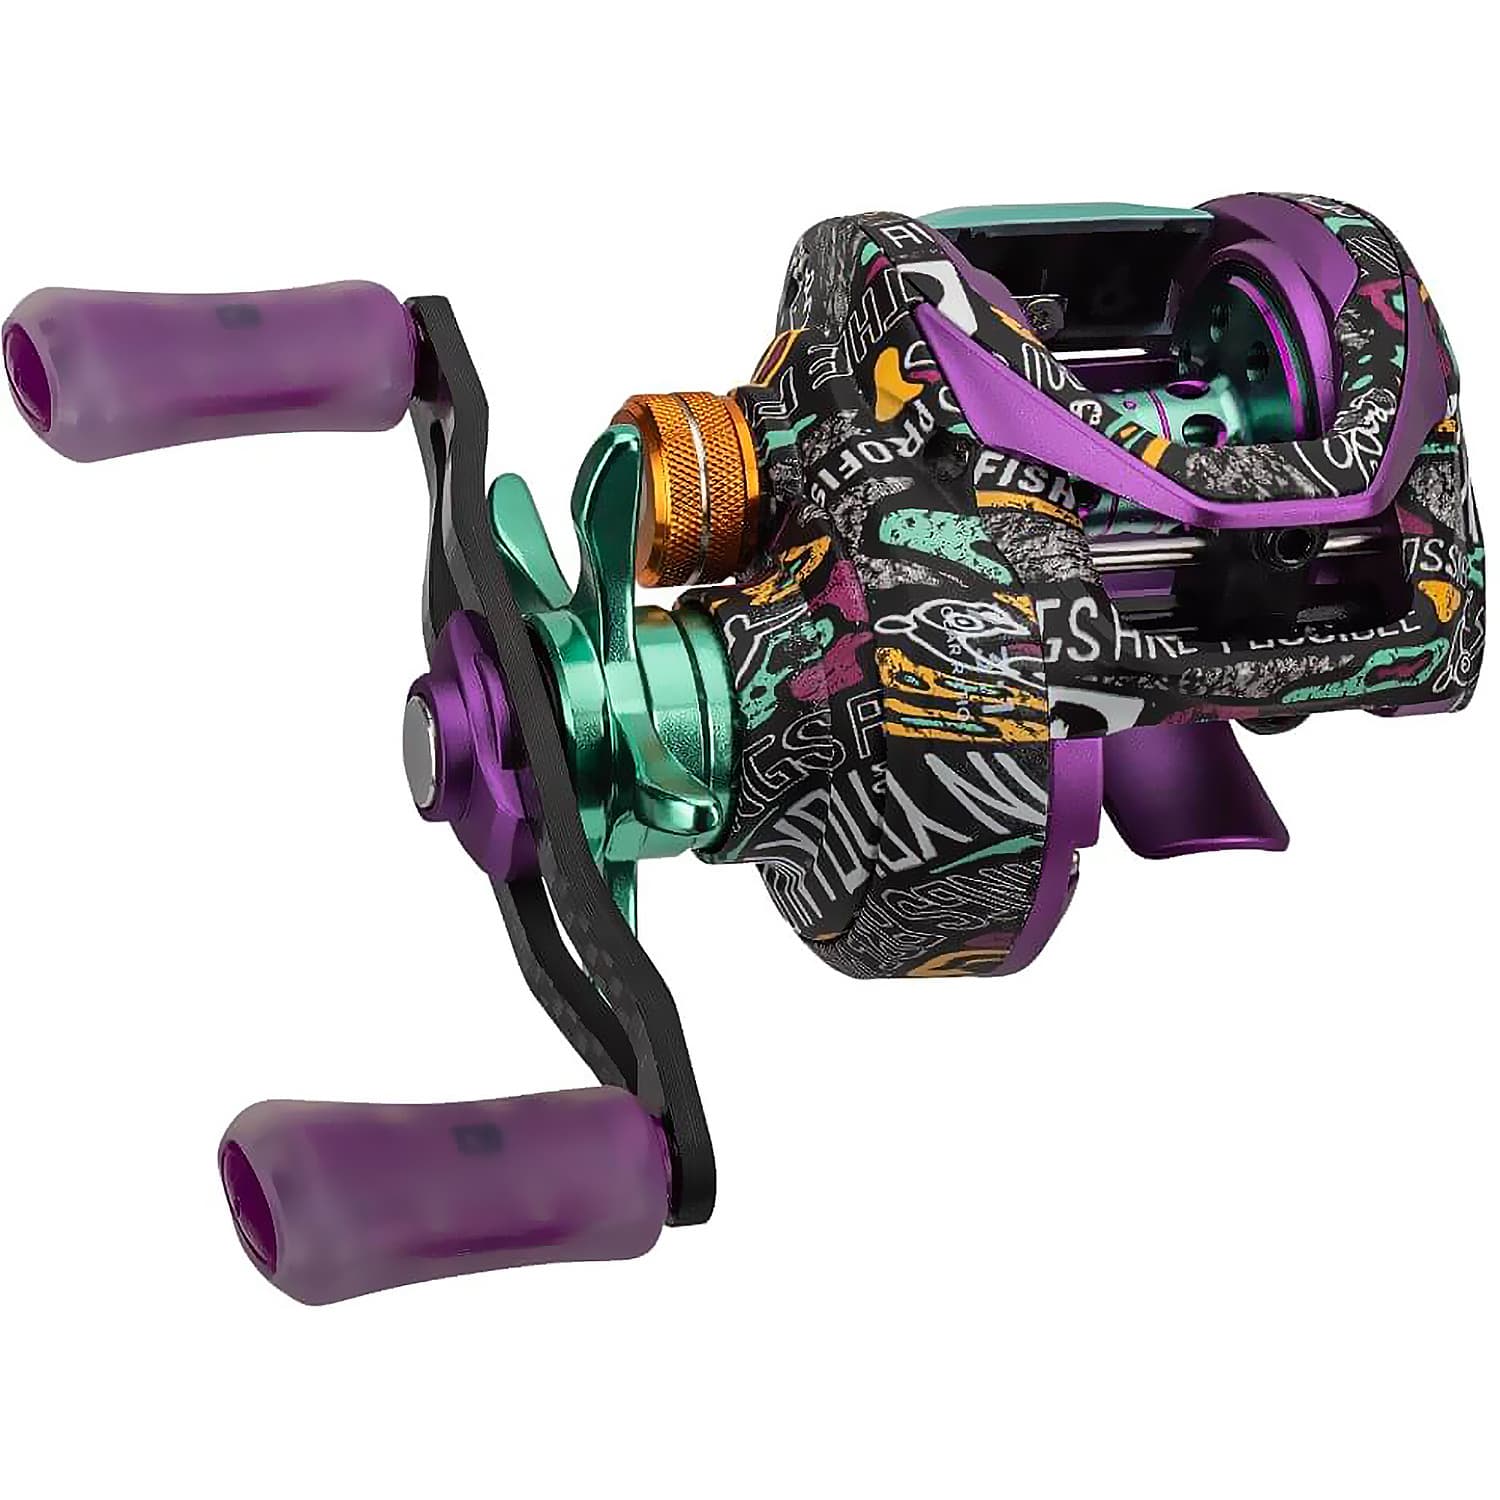 ProFISHiency KRAZY Pro Series Reels and Casting Combos Change the